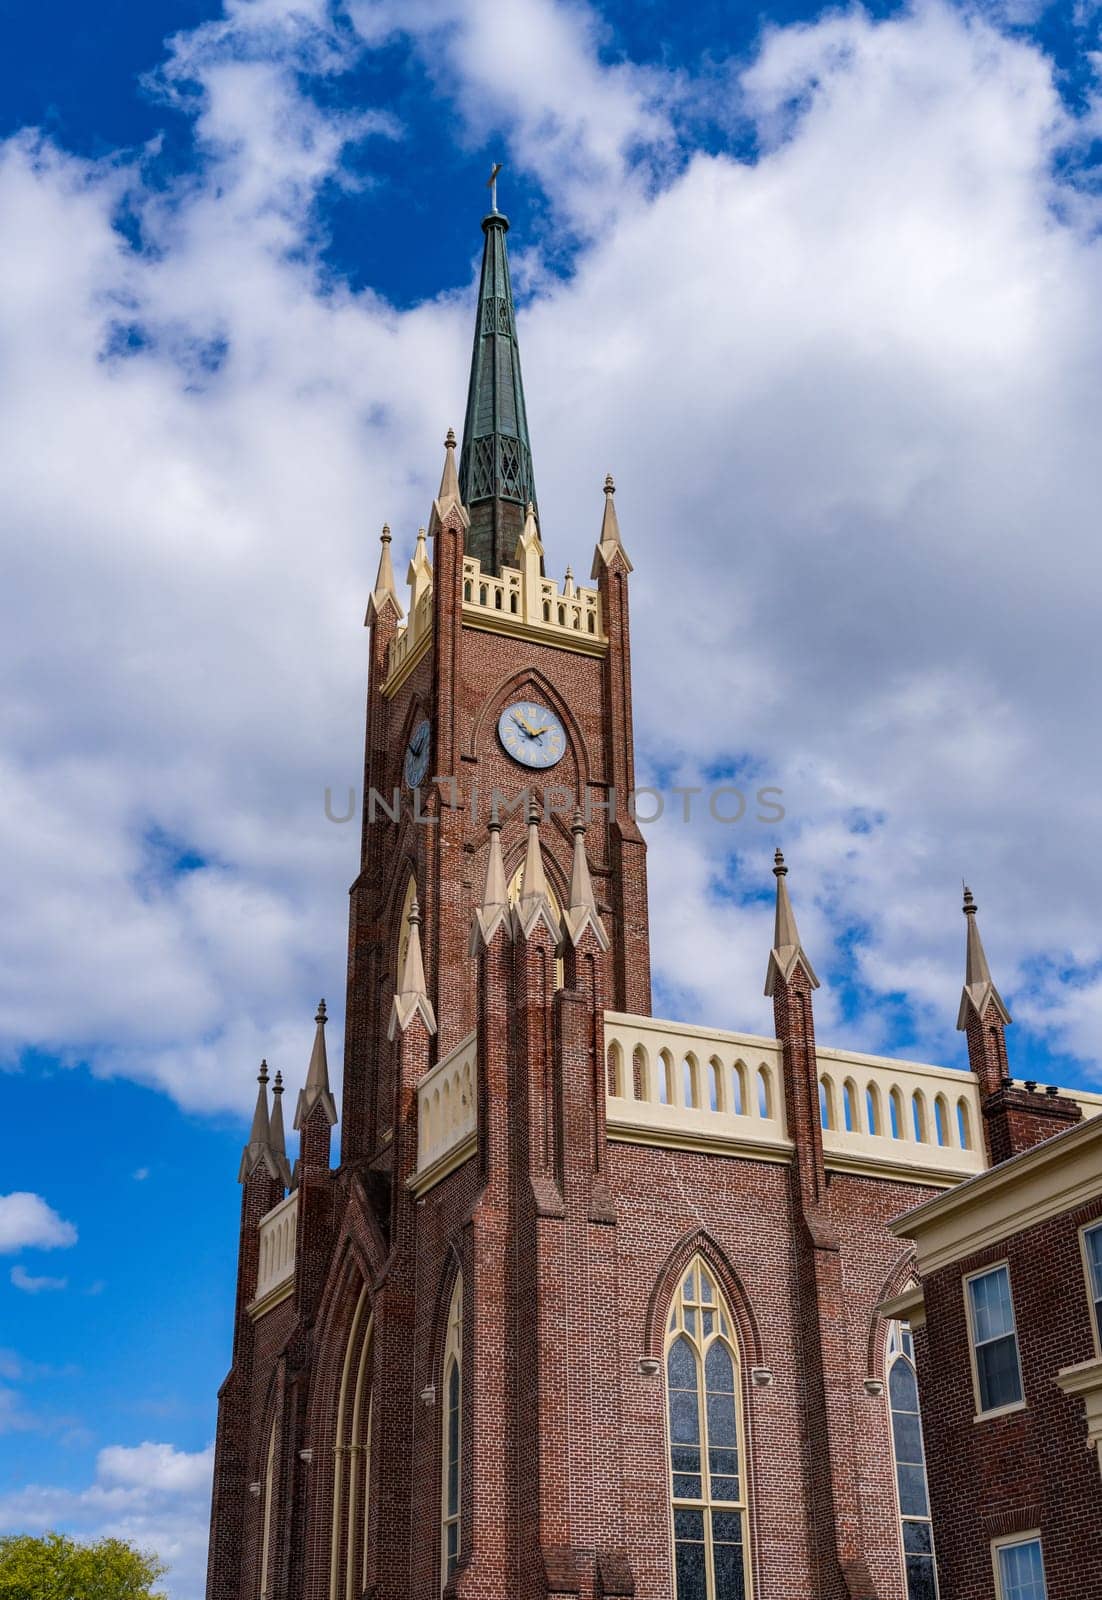 Exterior of St Mary Basilica in Natchez in Mississippi by steheap